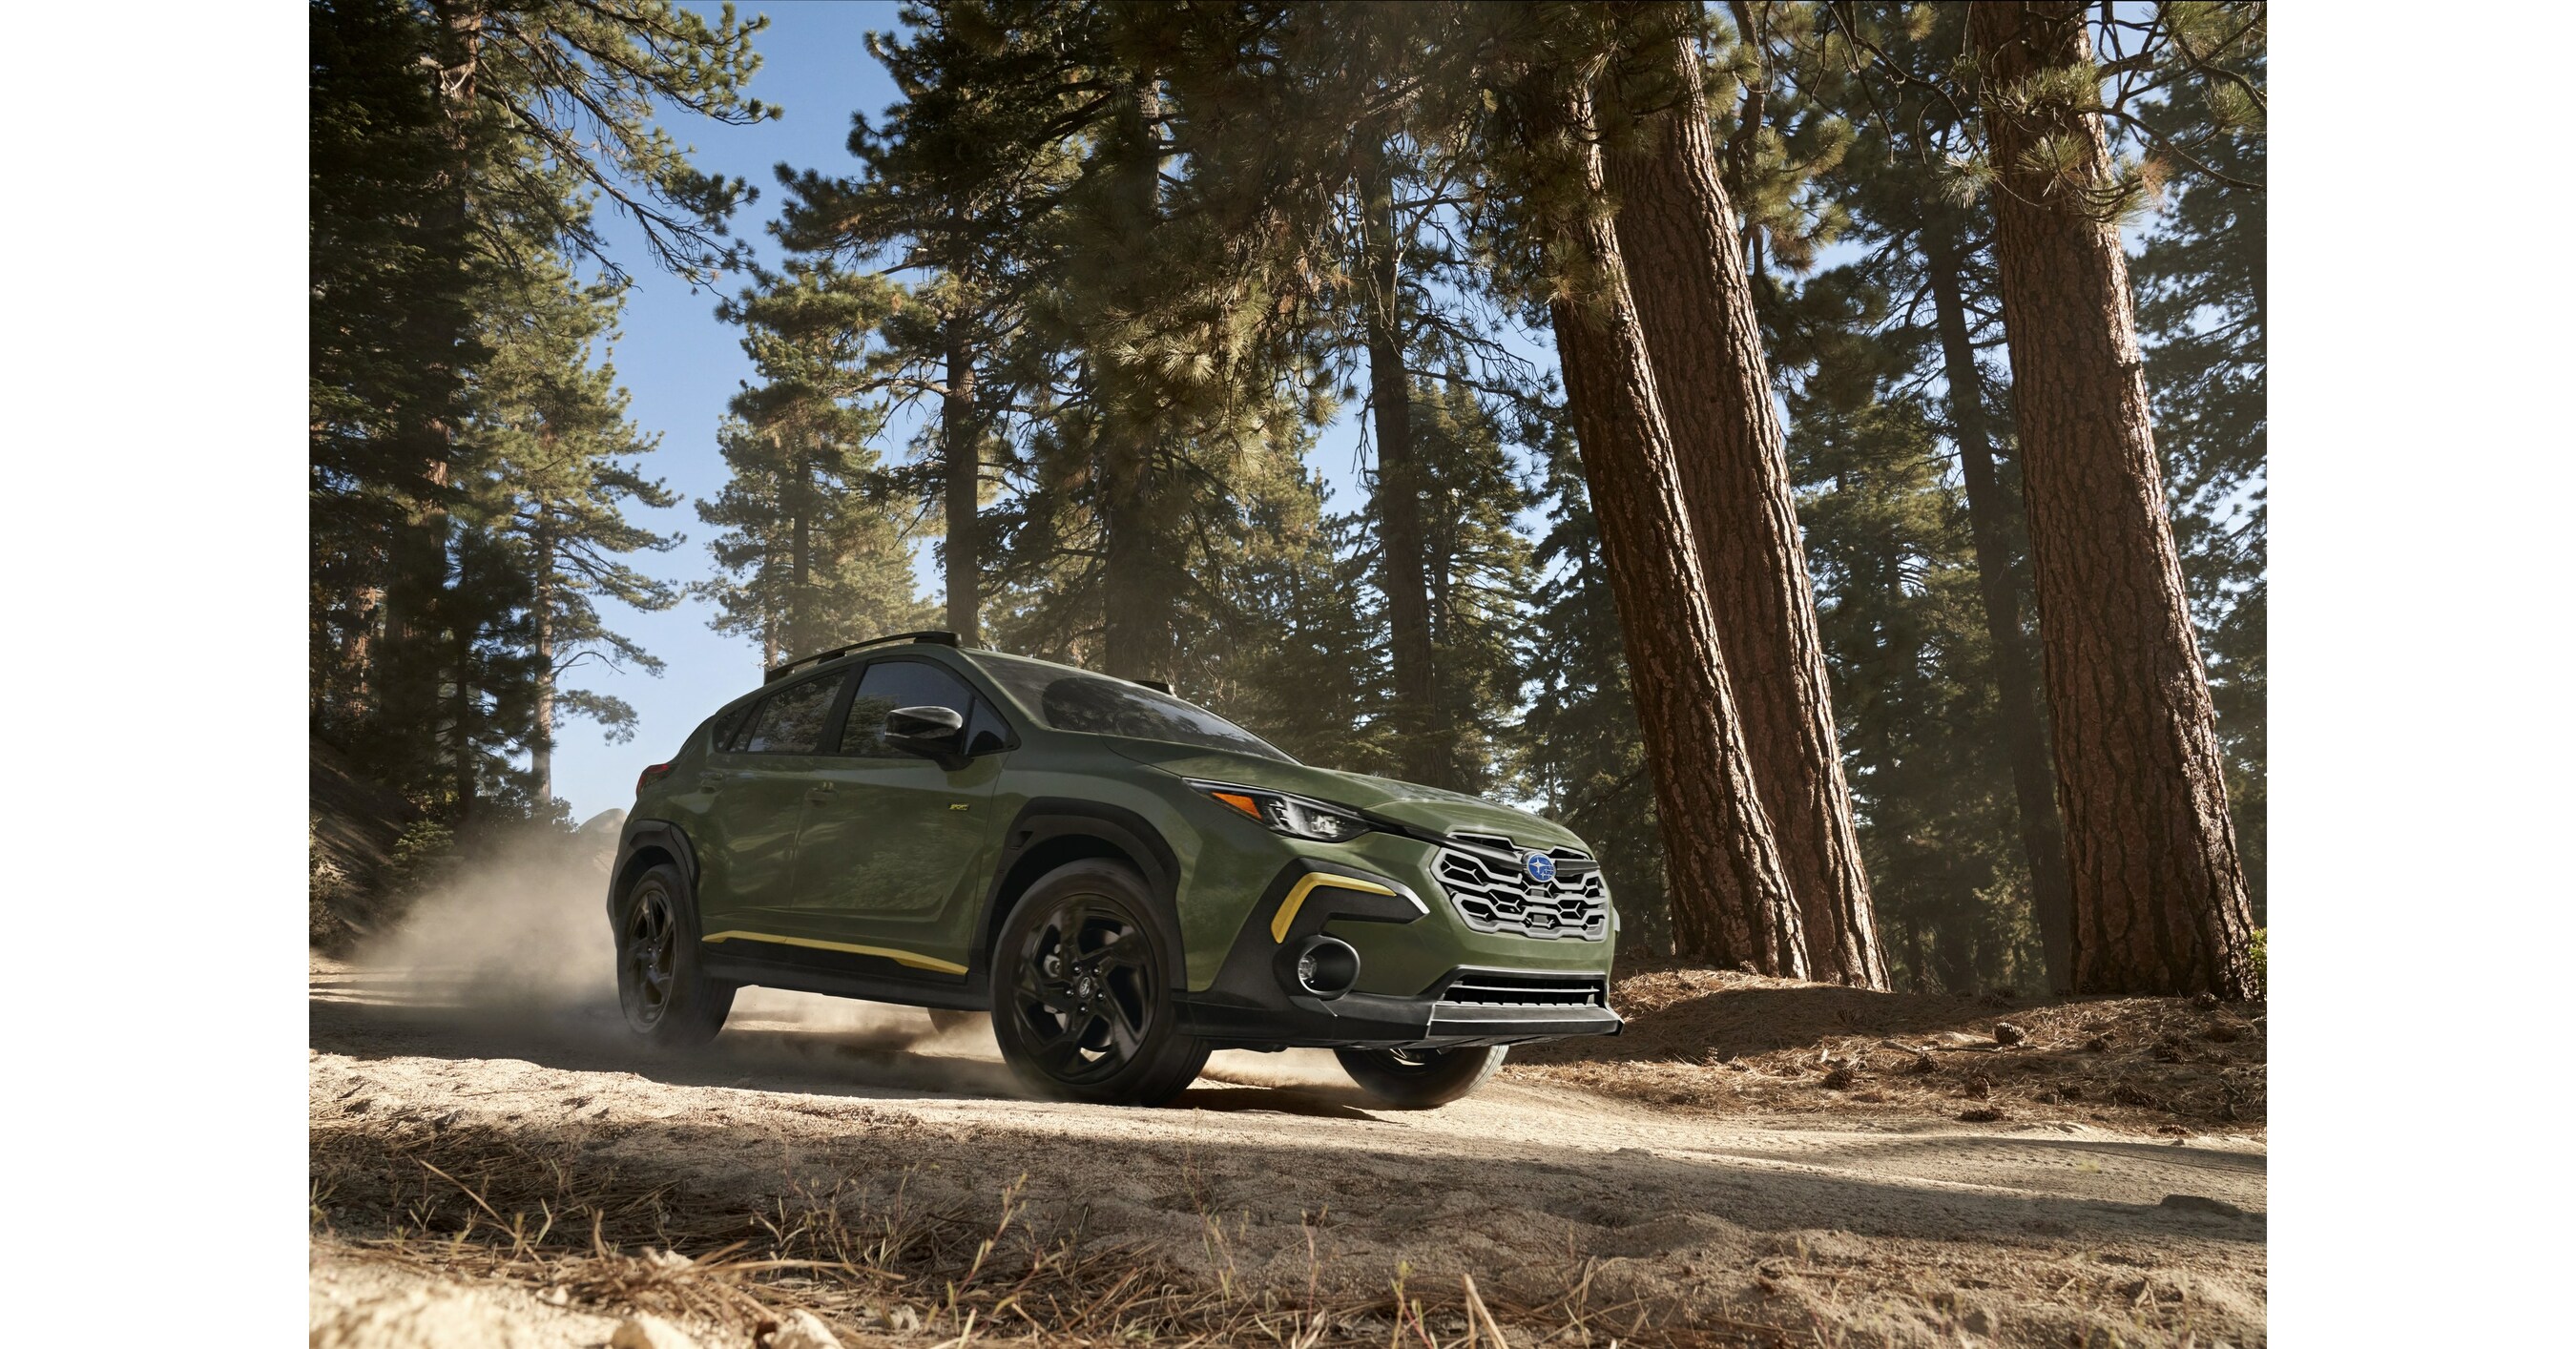 SUBARU DEBUTS THE ALL-NEW 2024 CROSSTREK COMPACT SUV WITH RUGGED NEW STYLING, IN-VEHICLE TECHNOLOGY, PERFORMANCE AND SAFETY